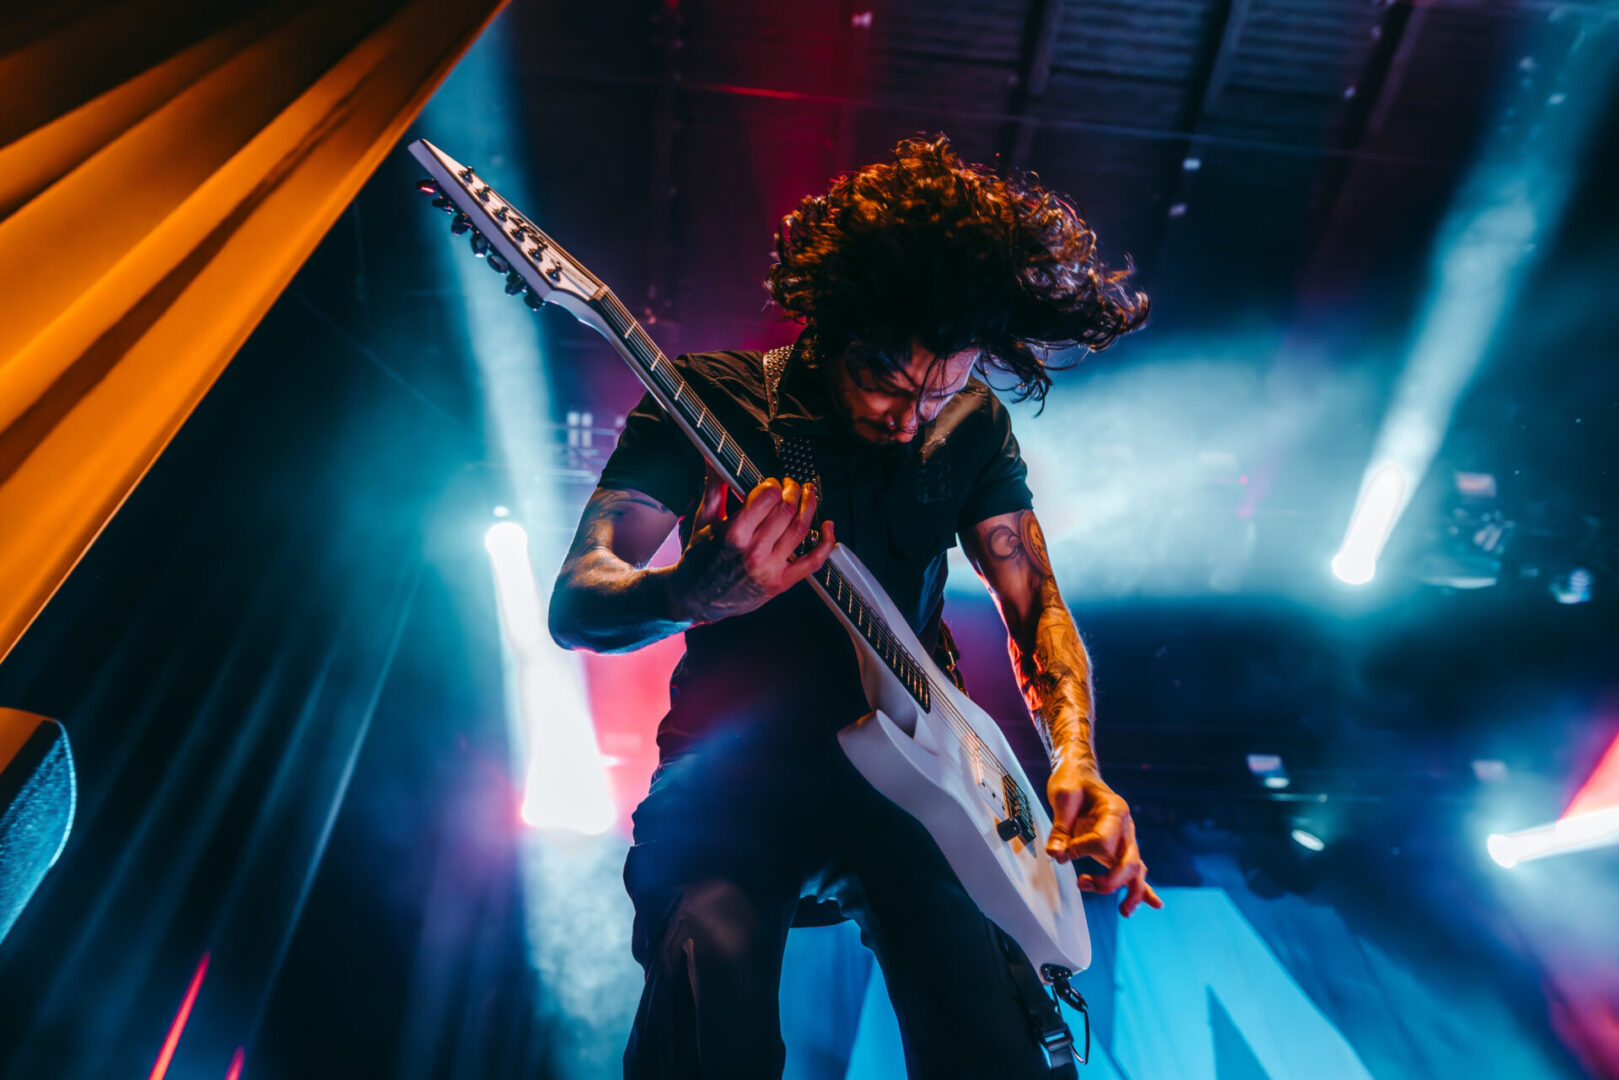 A man playing an electric guitar on stage during an Asking Alexandria tour.